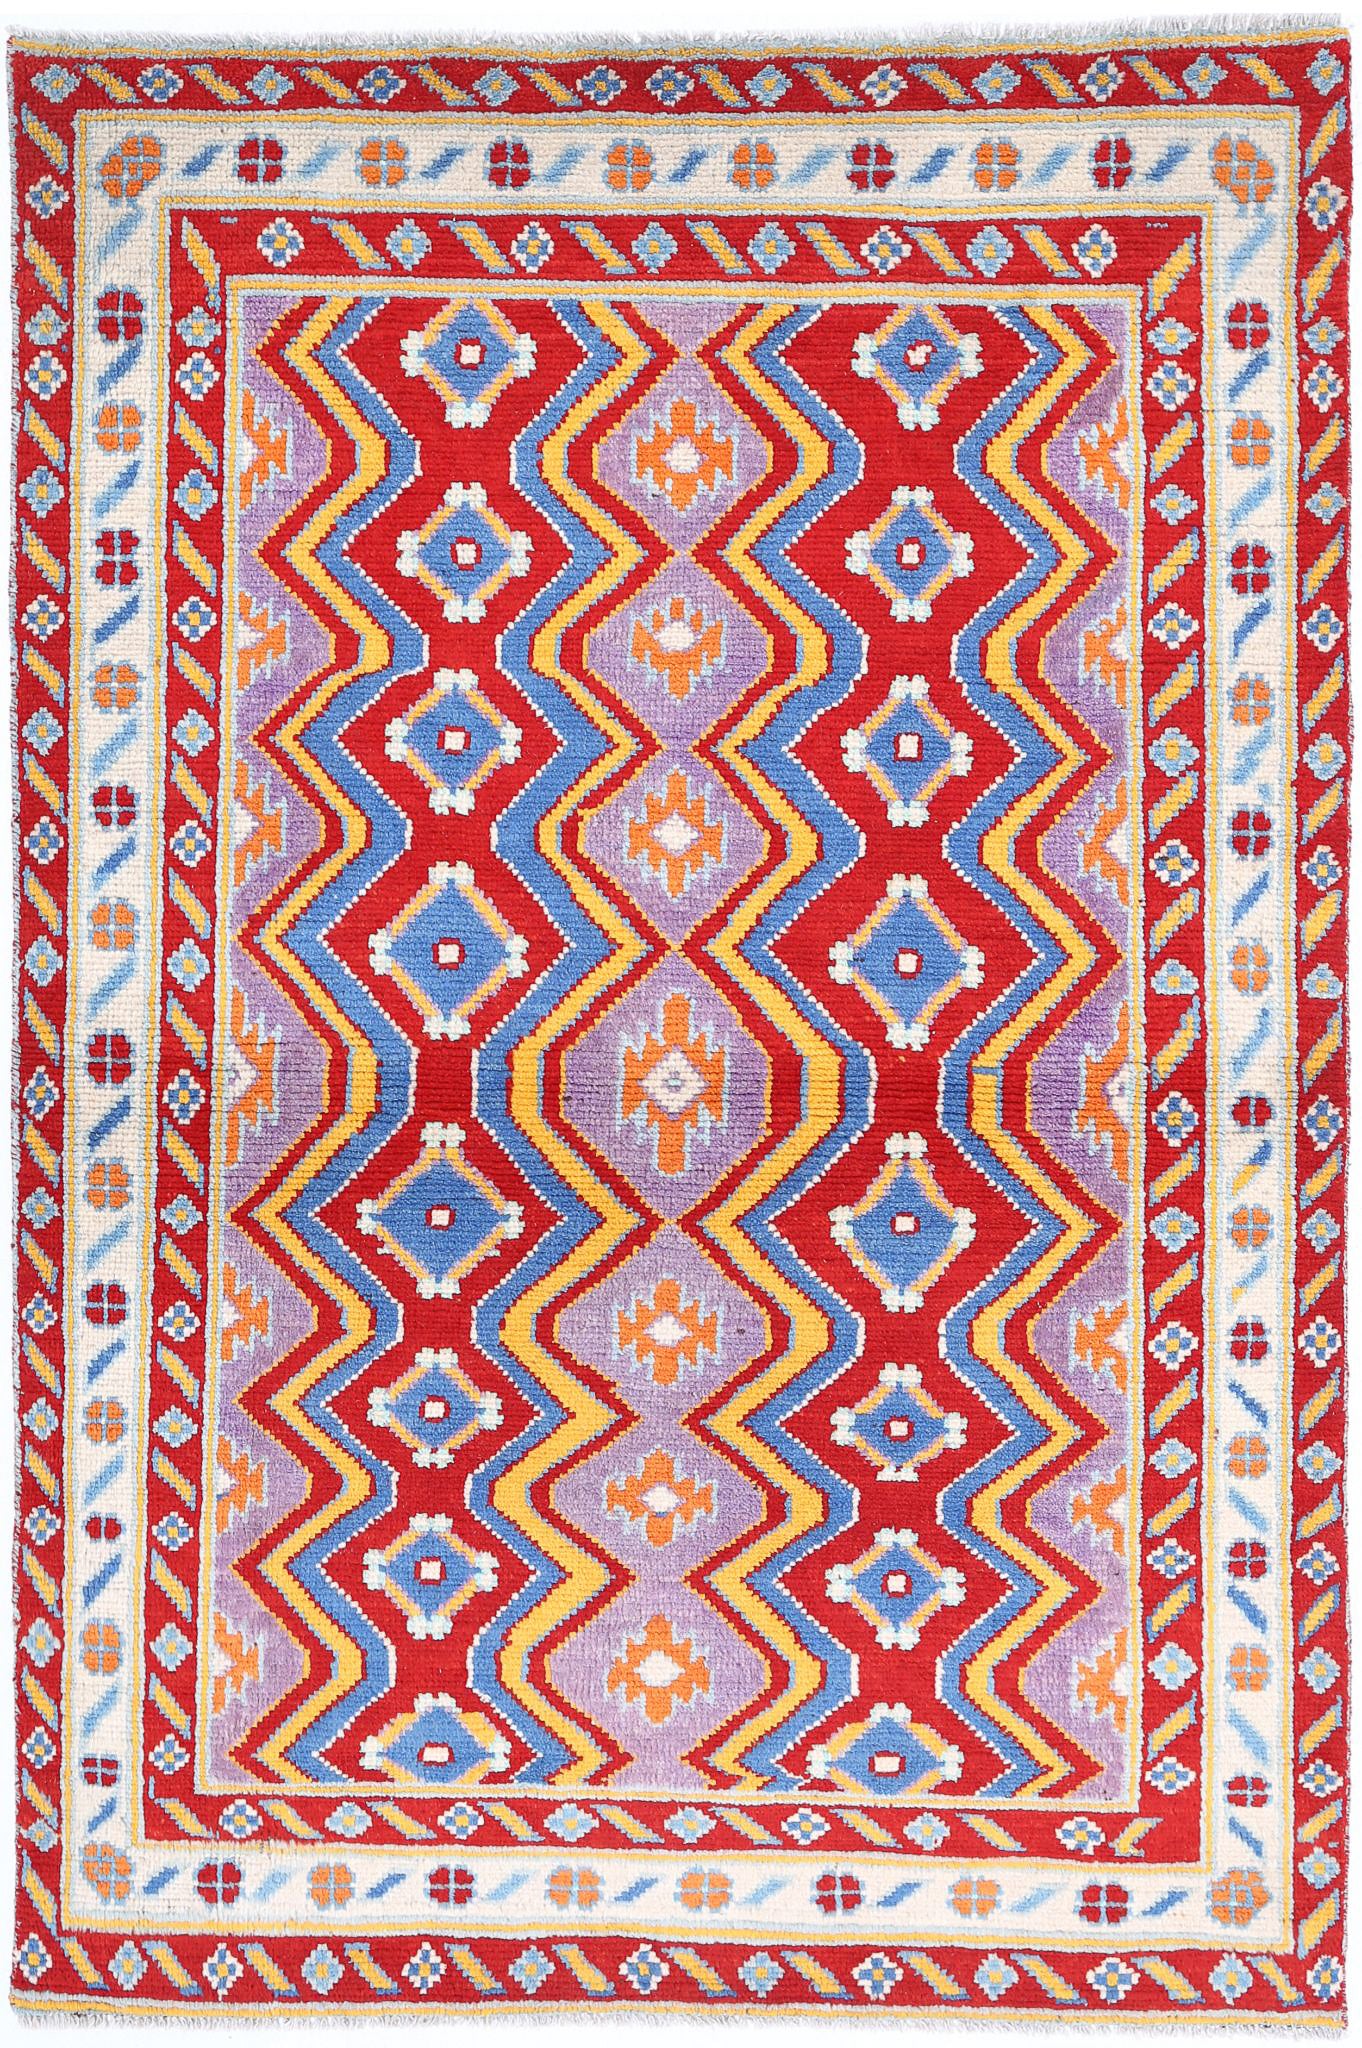 Revival-hand-knotted-qarghani-wool-rug-5014071.jpg